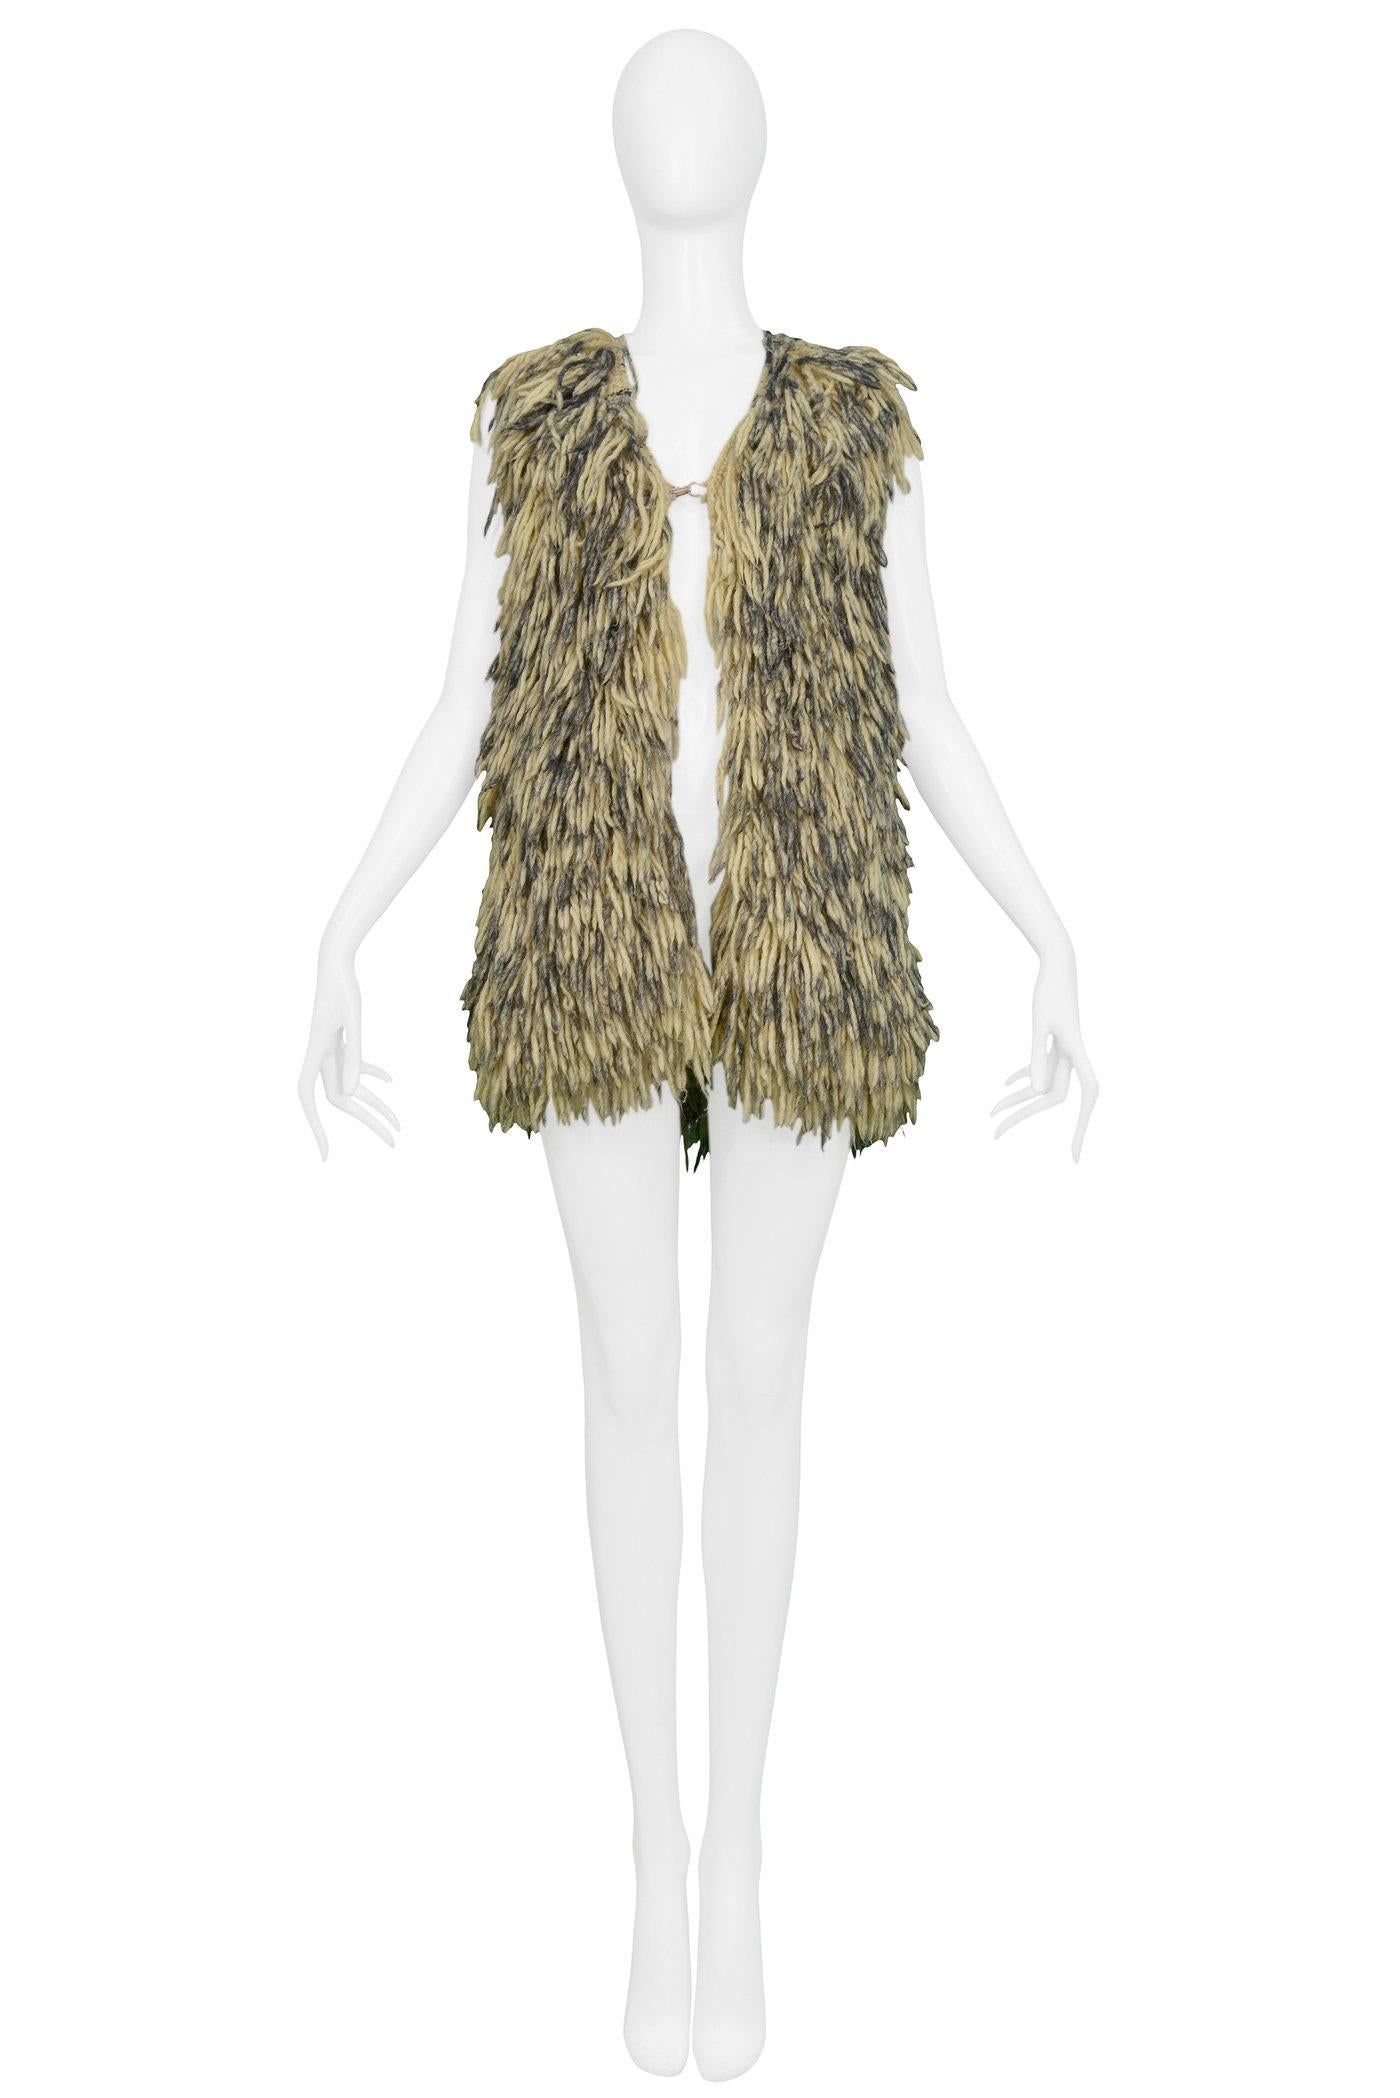 Resurrection Vintage is excited to offer a vintage Maison Martin Margiela off-white knit shag gilet with two-tone grey tip yarn, and hook and eye closure. 

Maison Martin Margiela
Size: One Size
Knit - Feel Like Wool
Excellent Vintage